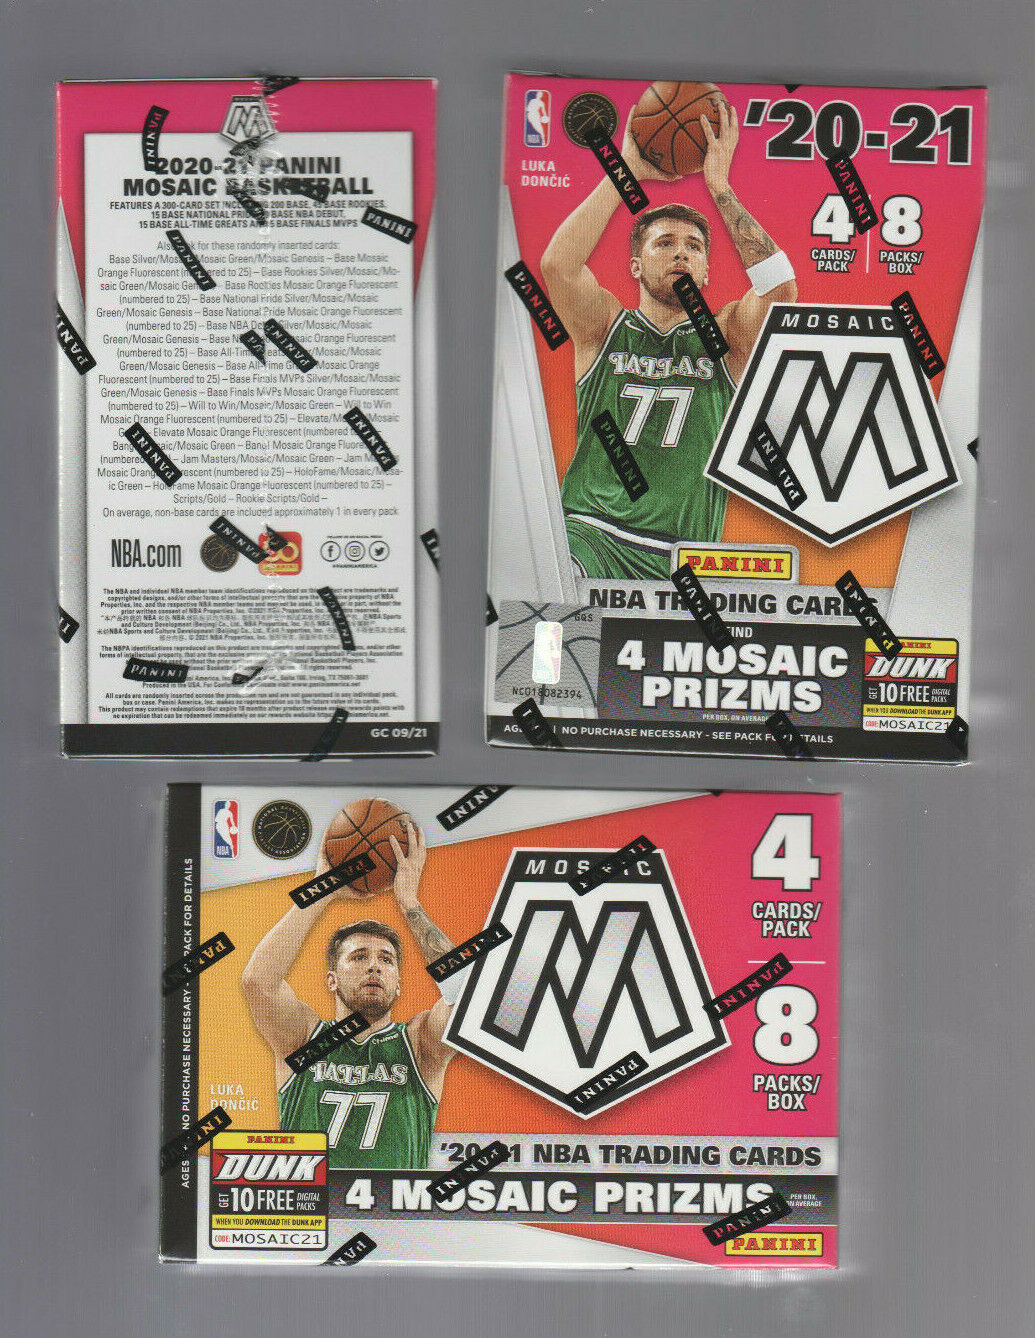 3 2020 21 PANINI MOSAIC BLASTER Popular brand Max 70% OFF in the world BASKETBALL BO FACTORY SEALED